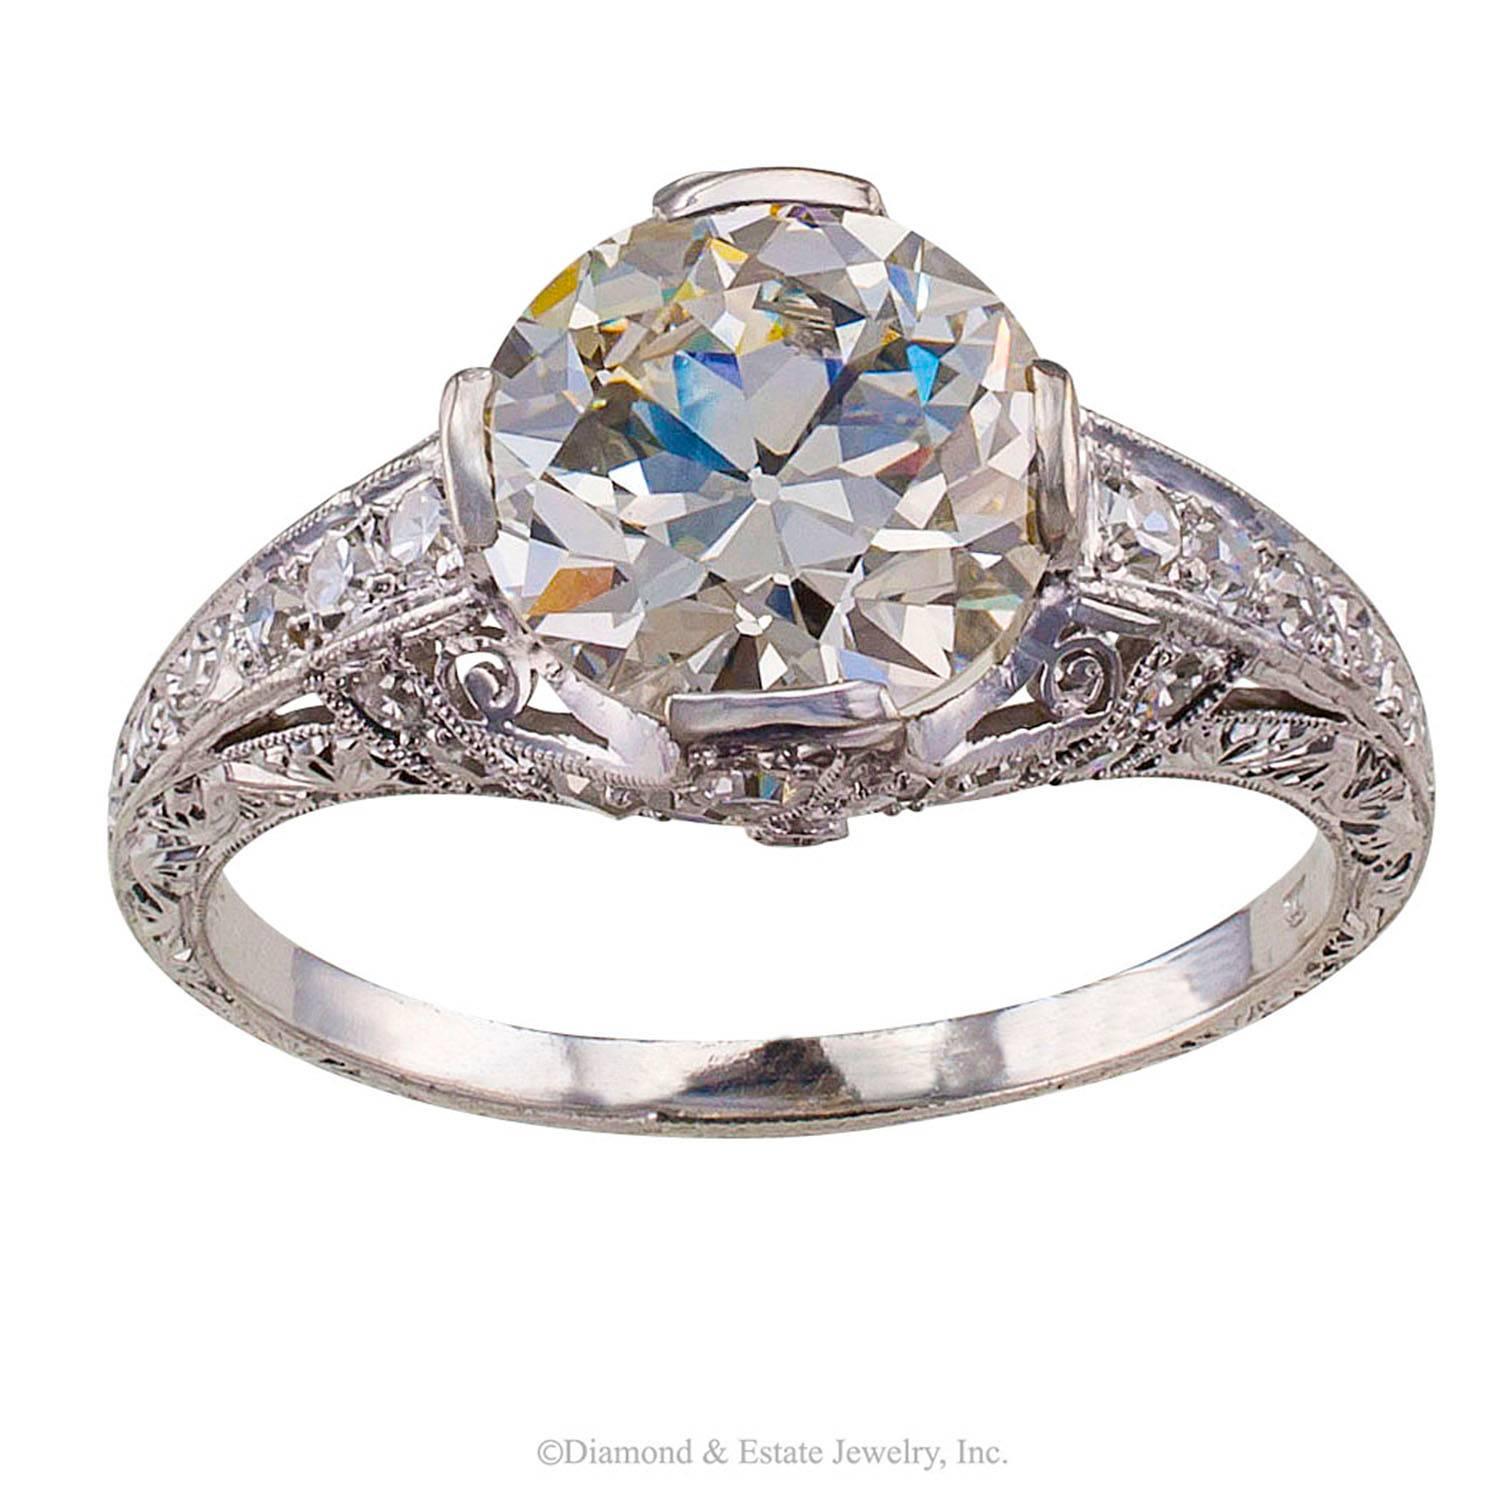 GIA 2.27 Carats Diamond Solitaire Art Deco Engagement Ring

GIA 2.27 carats K color VVS2 clarity Art Deco platinum engagement ring circa 1925.  Look closely and look all around as much as your browser will  allow feast your eyes  and take in the